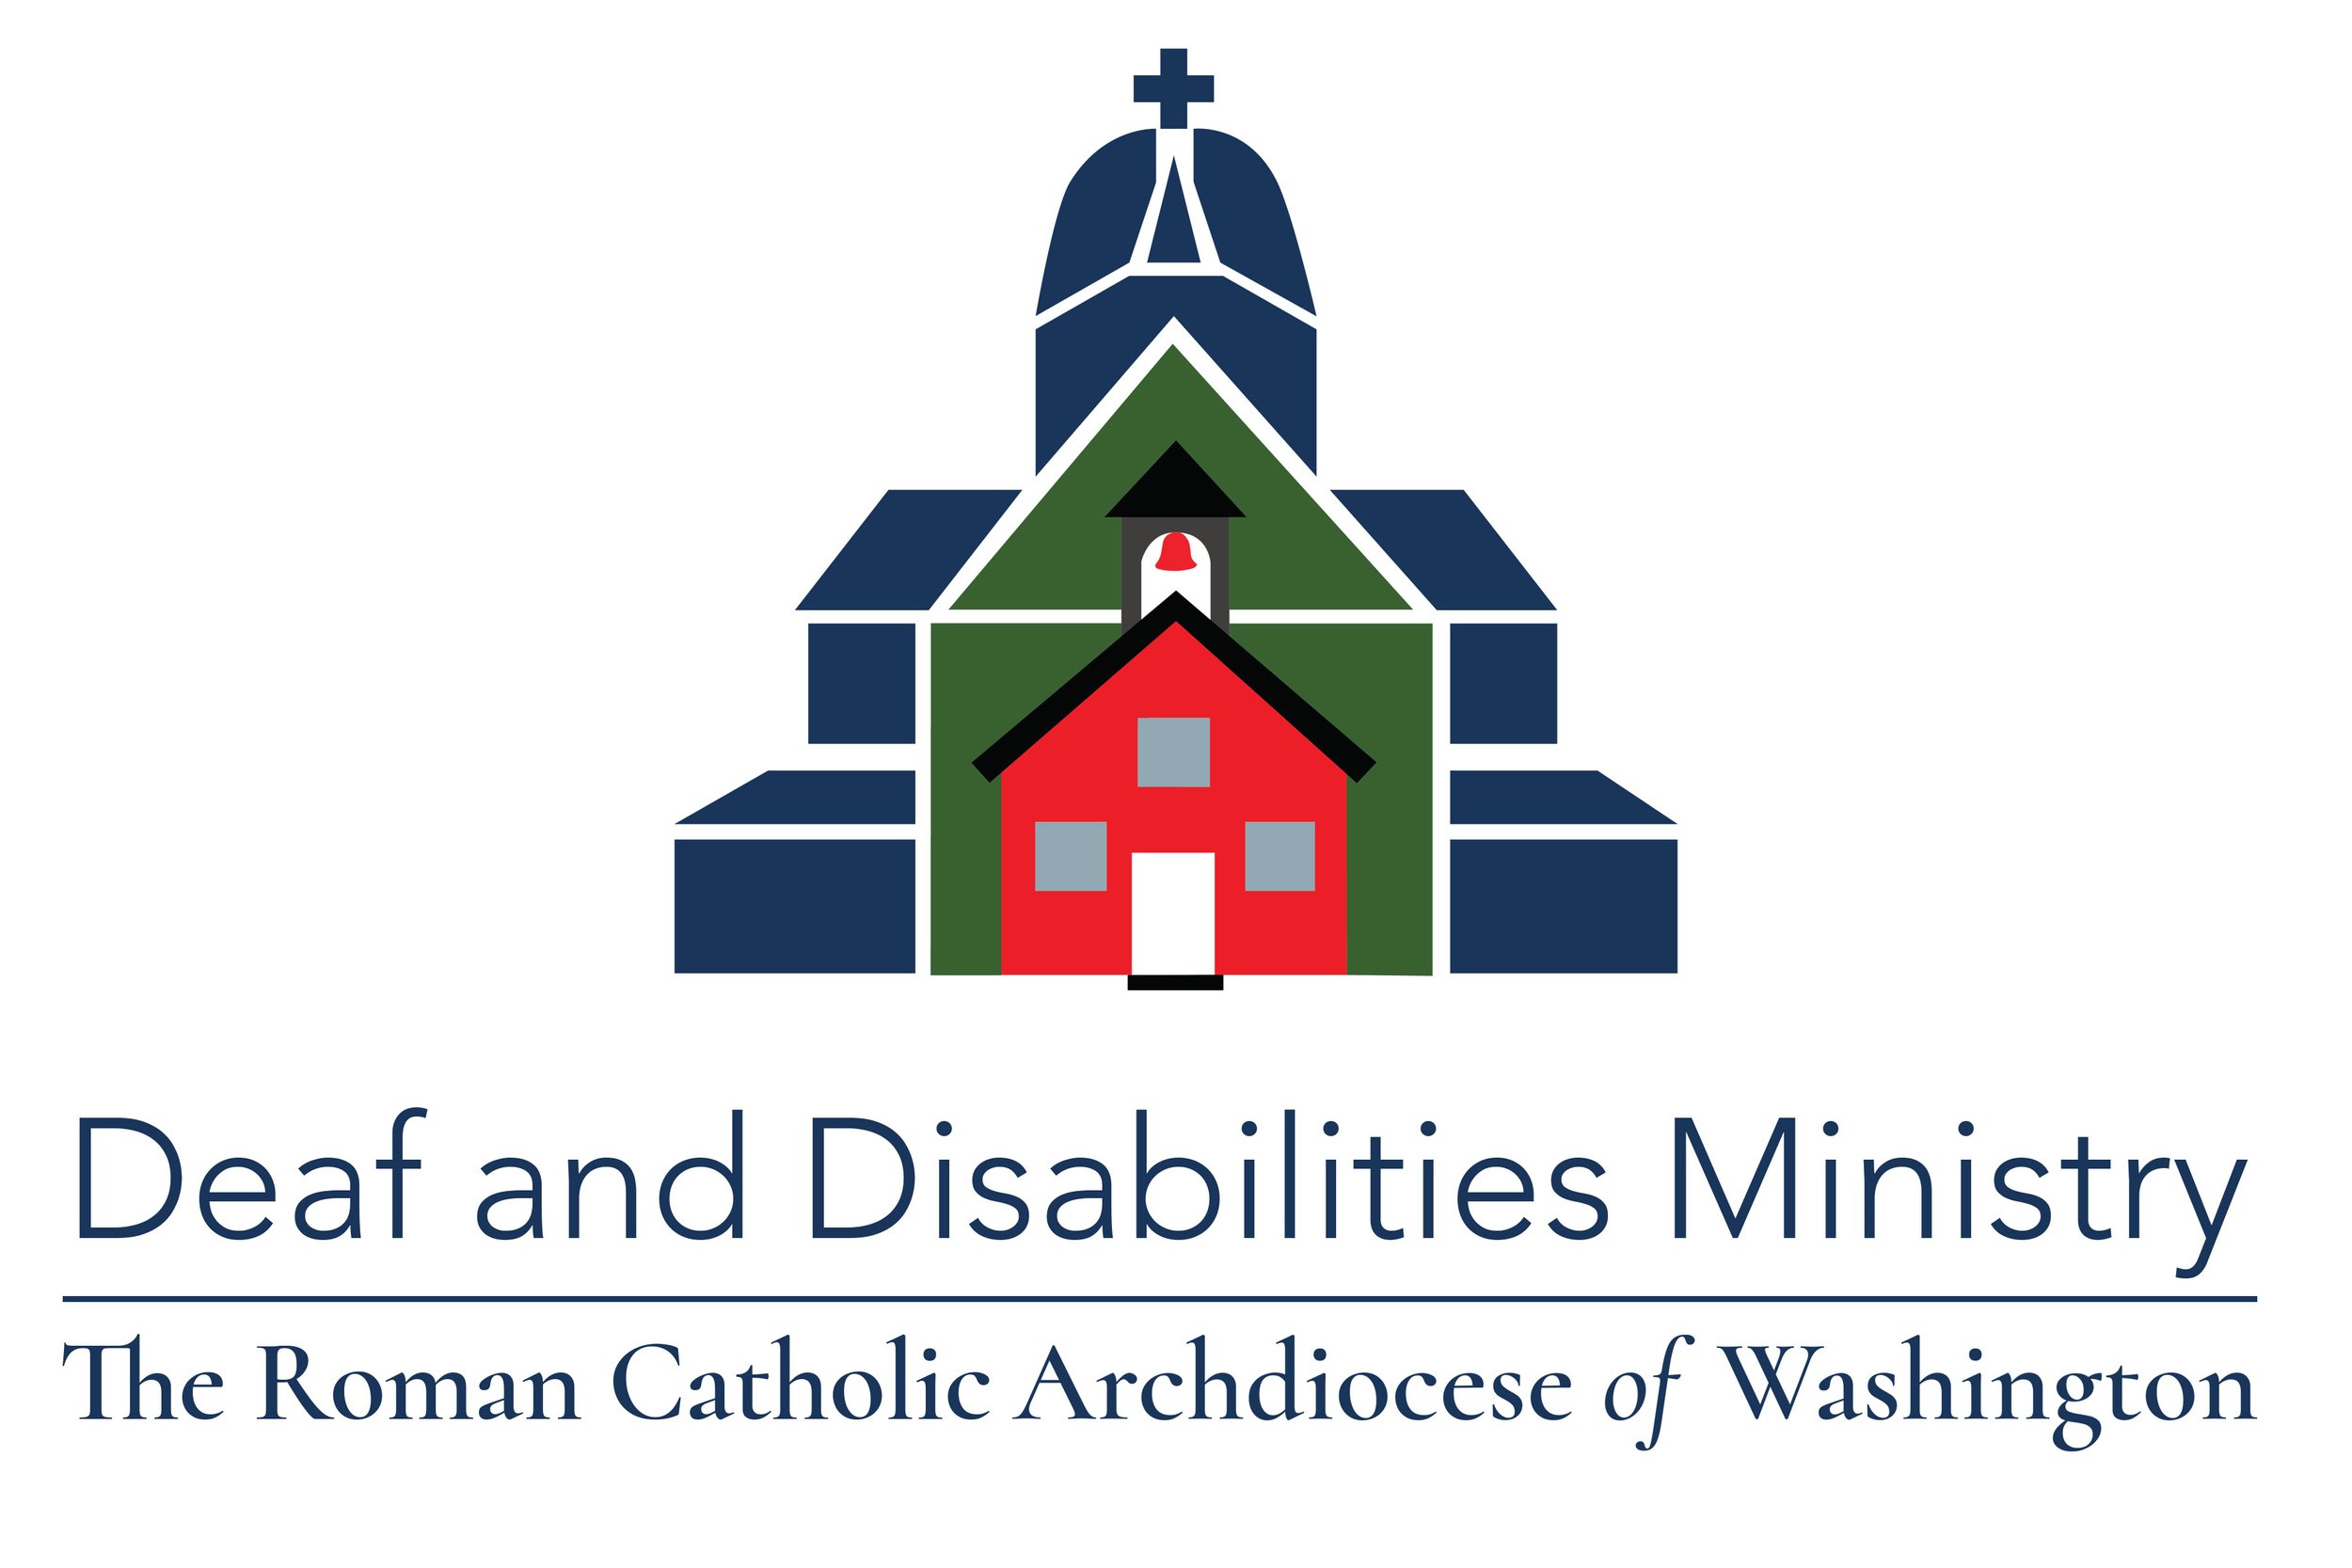 Roman Catholic Archdiocese of Washington Office of Deaf and Disabilities Ministry